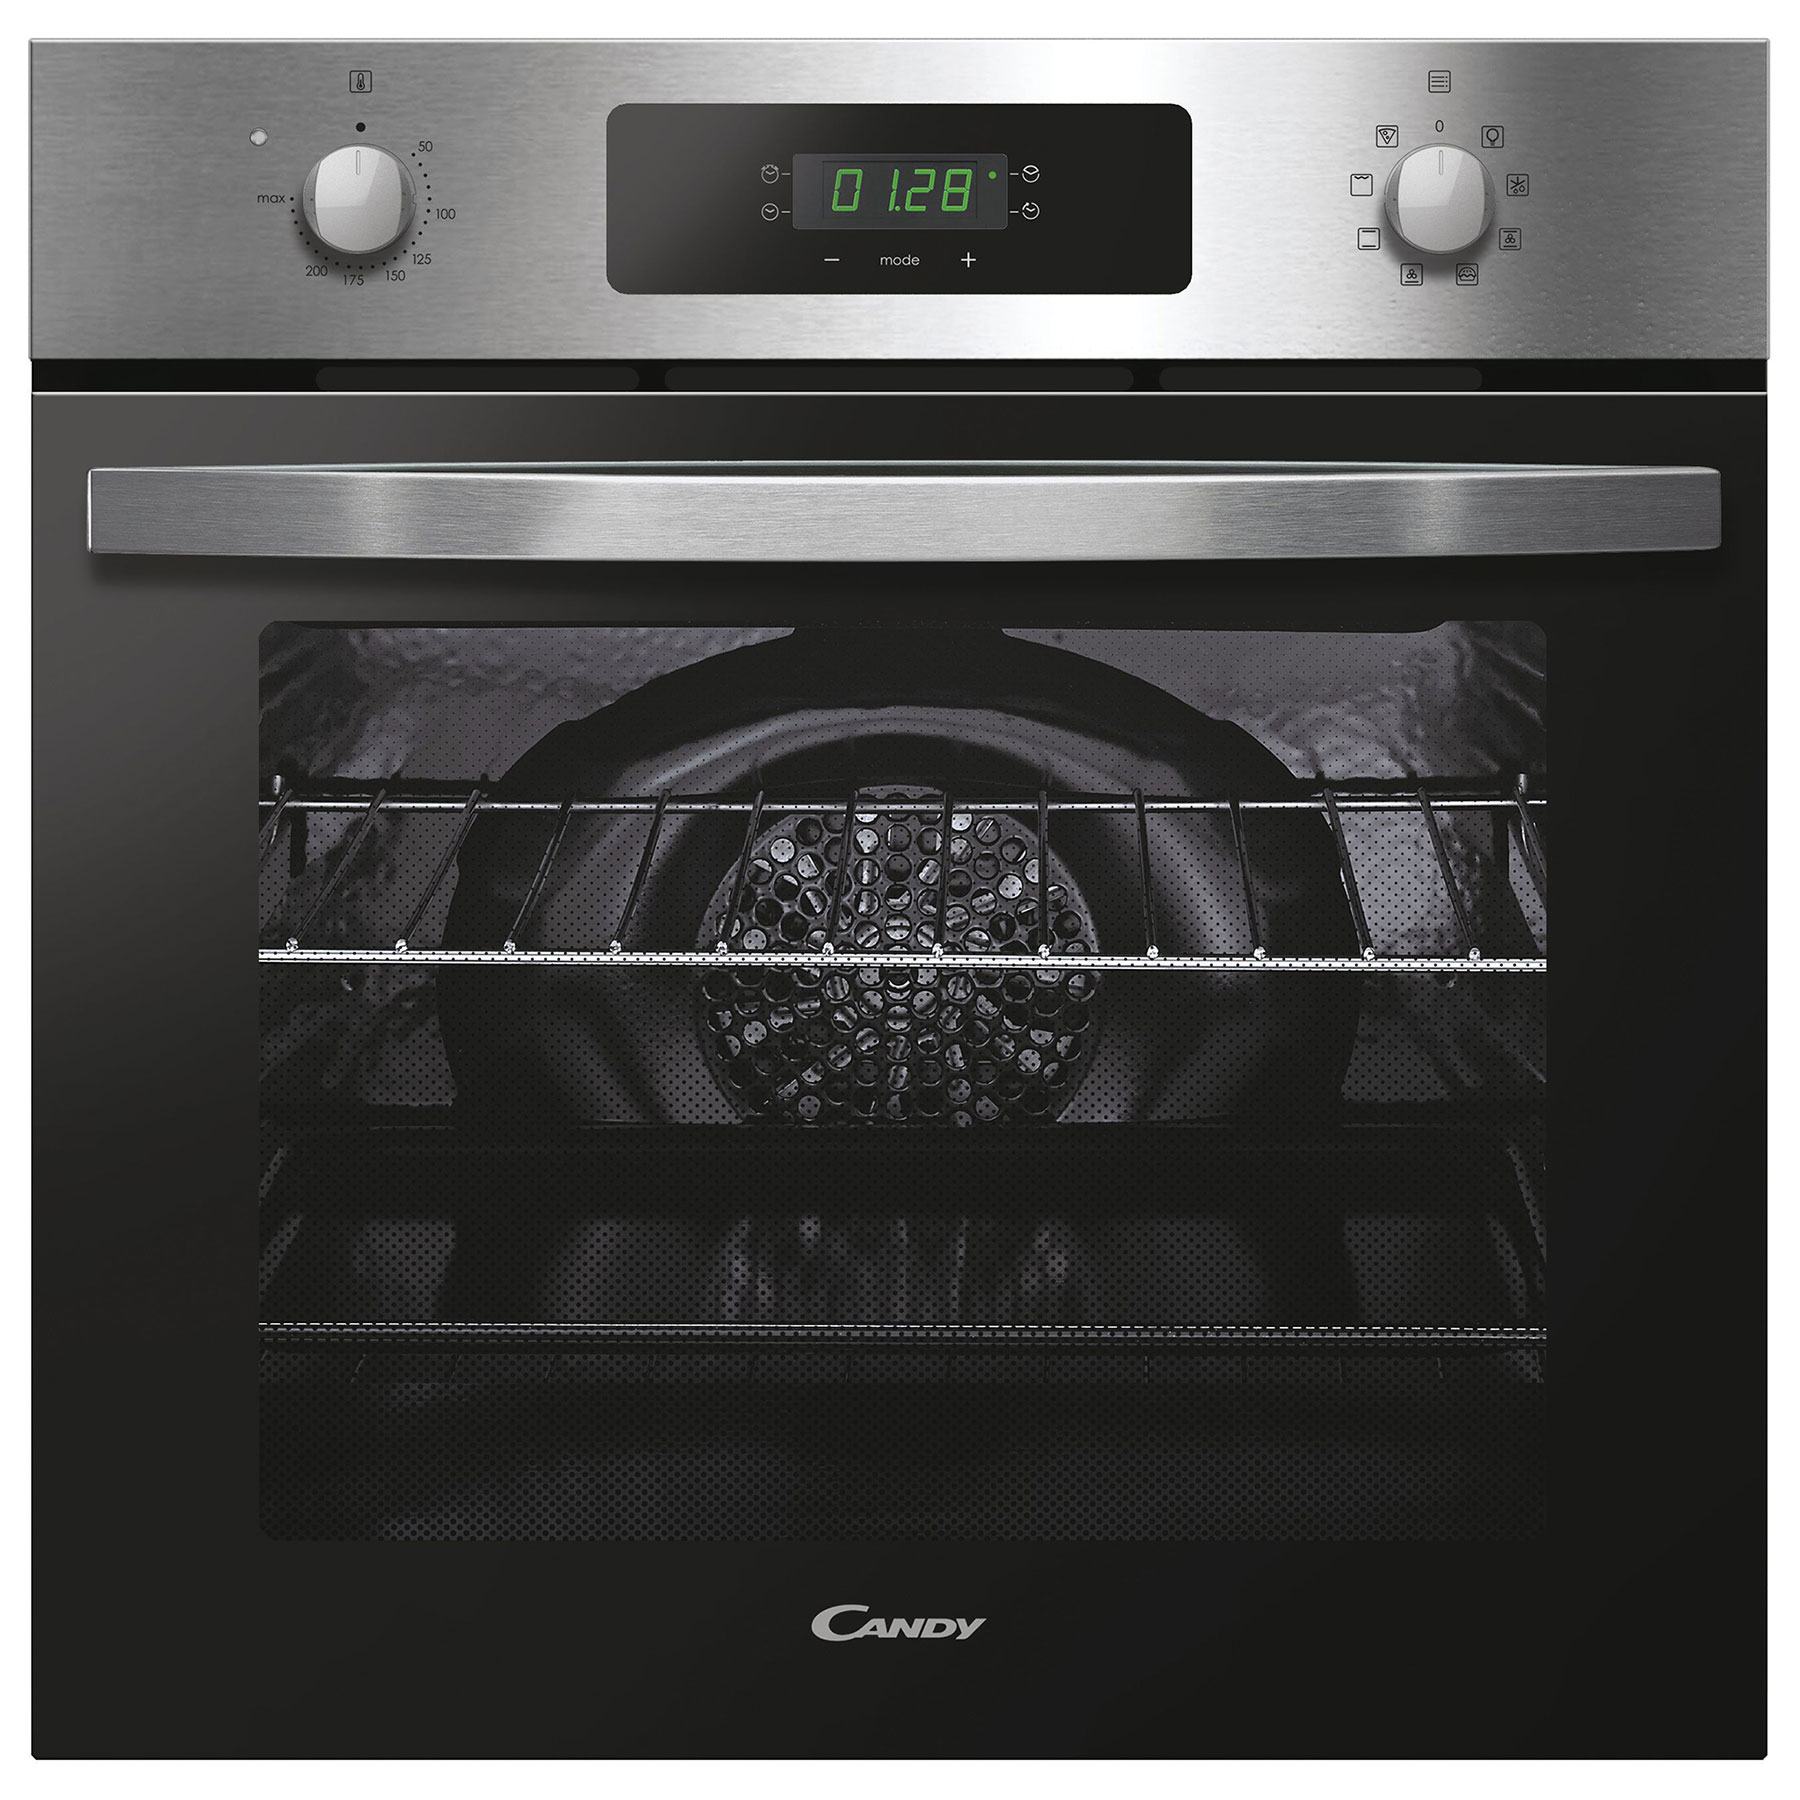 Candy FIDCX605 Built In Electric Single Oven in St Steel 65L A Rated